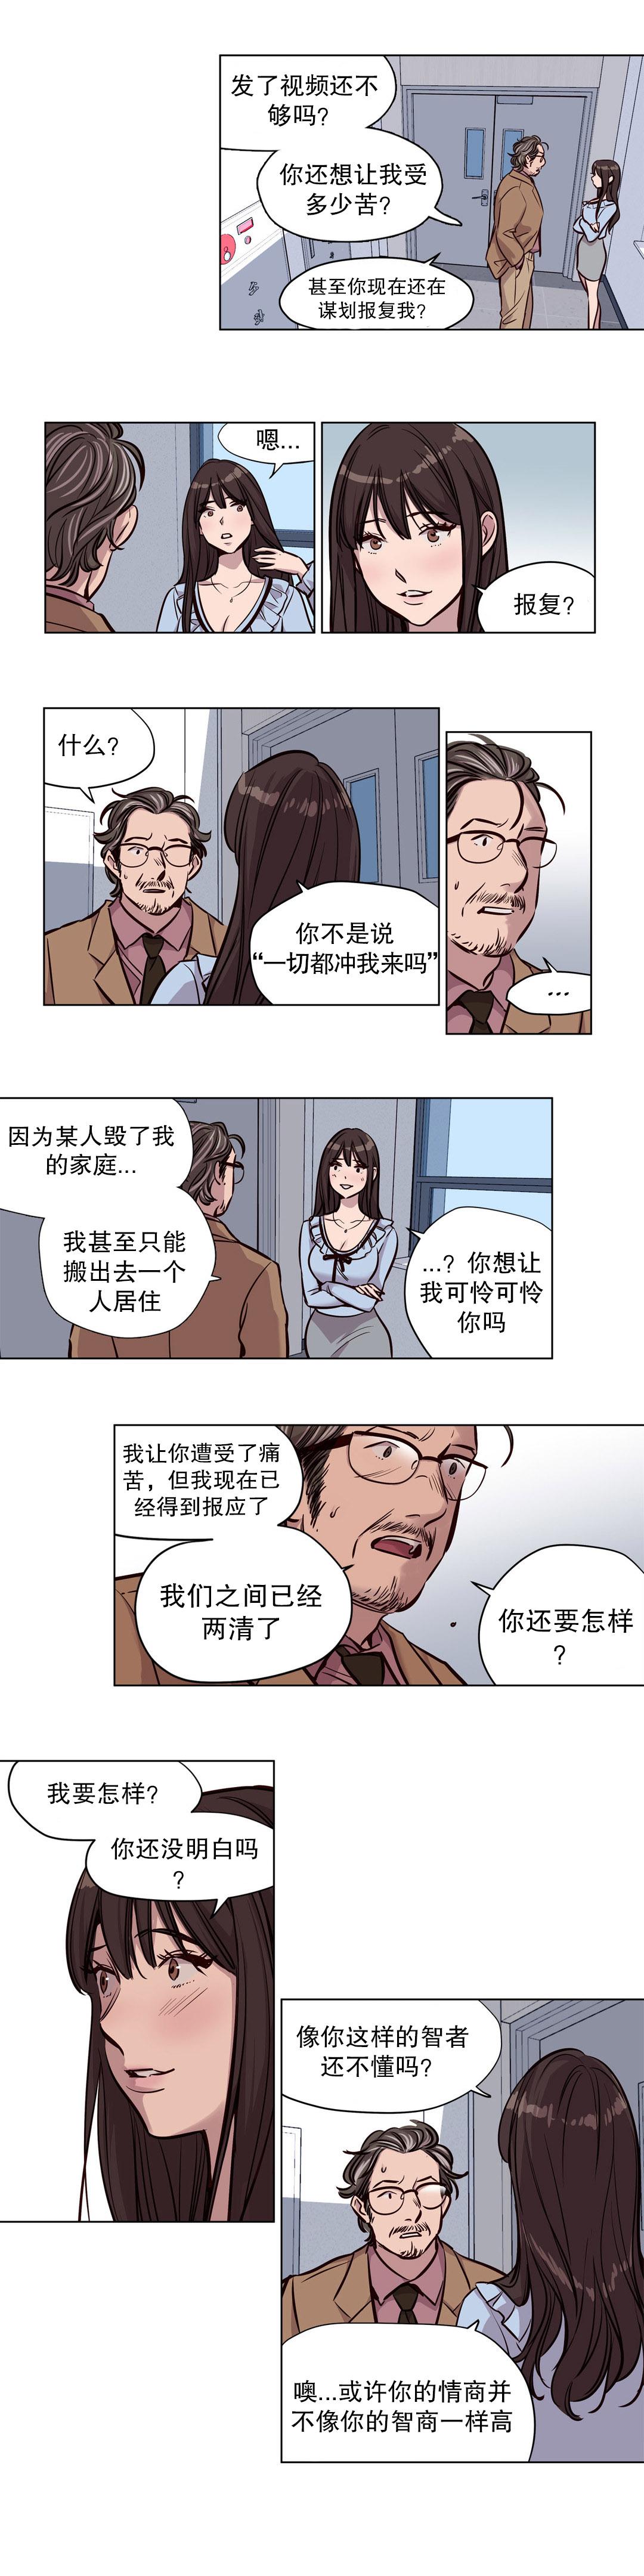 Negro [Ramjak] 赎罪营(Atonement Camp) Ch.50-52 (Chinese) Step Fantasy - Page 10